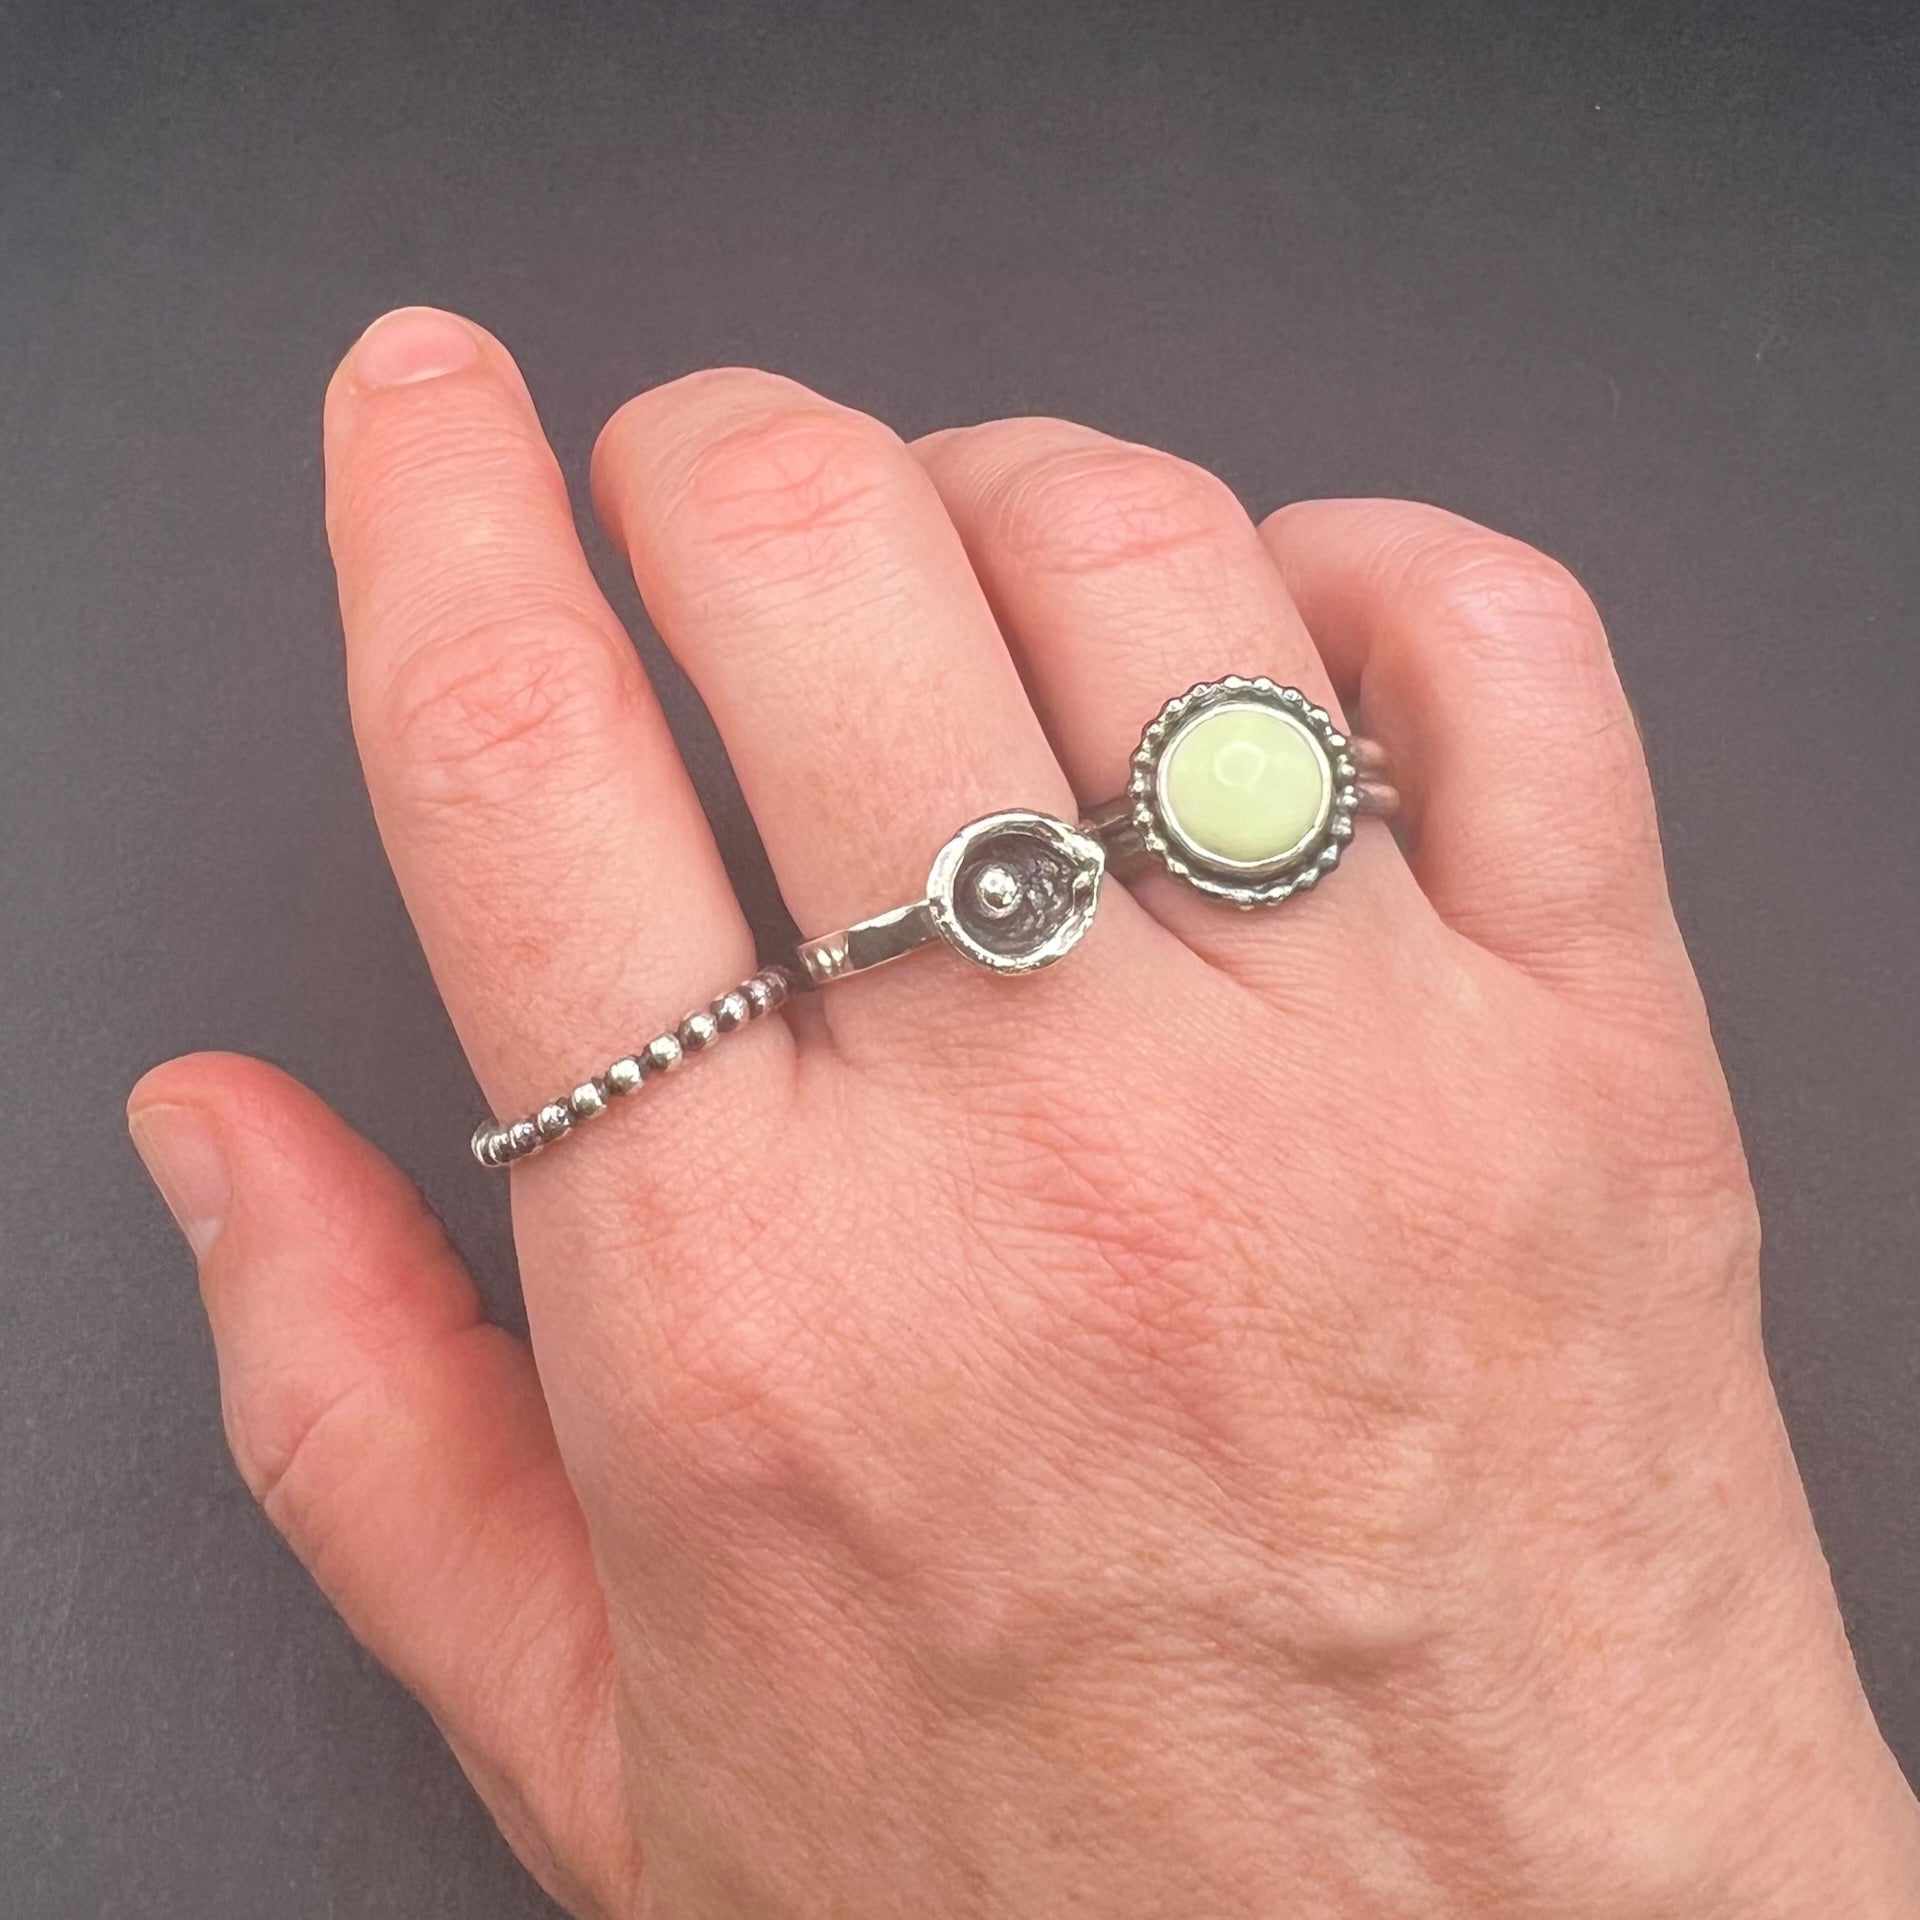 Hand wearing 3 different rings.  One bead wire ring, one water cast ring and one lemon chrysoprase feature ring.  